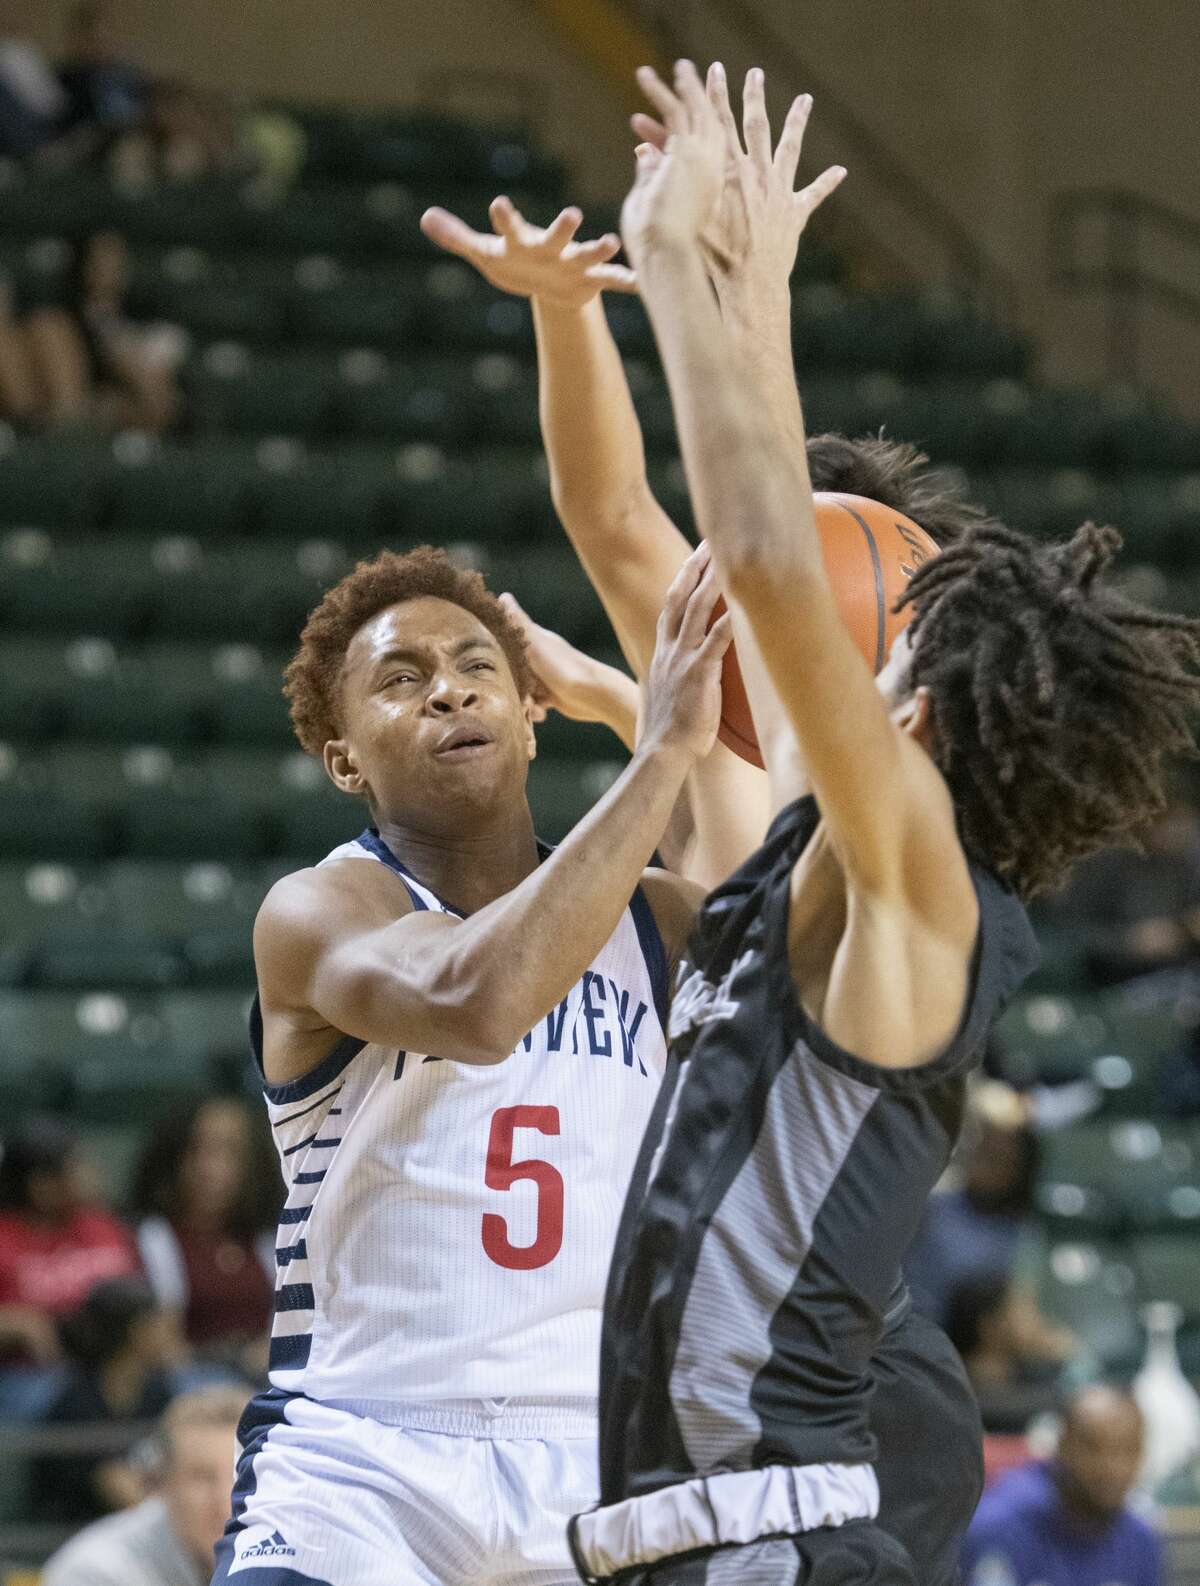 Plainview's Karomo Collins drives to the basket between Randall's Ayden Rodriguez and JJ Buchanan 12/30/2021 during the Byron Johnston Holiday Classic at the Chaparral Center. Tim Fischer/Reporter-Telegram